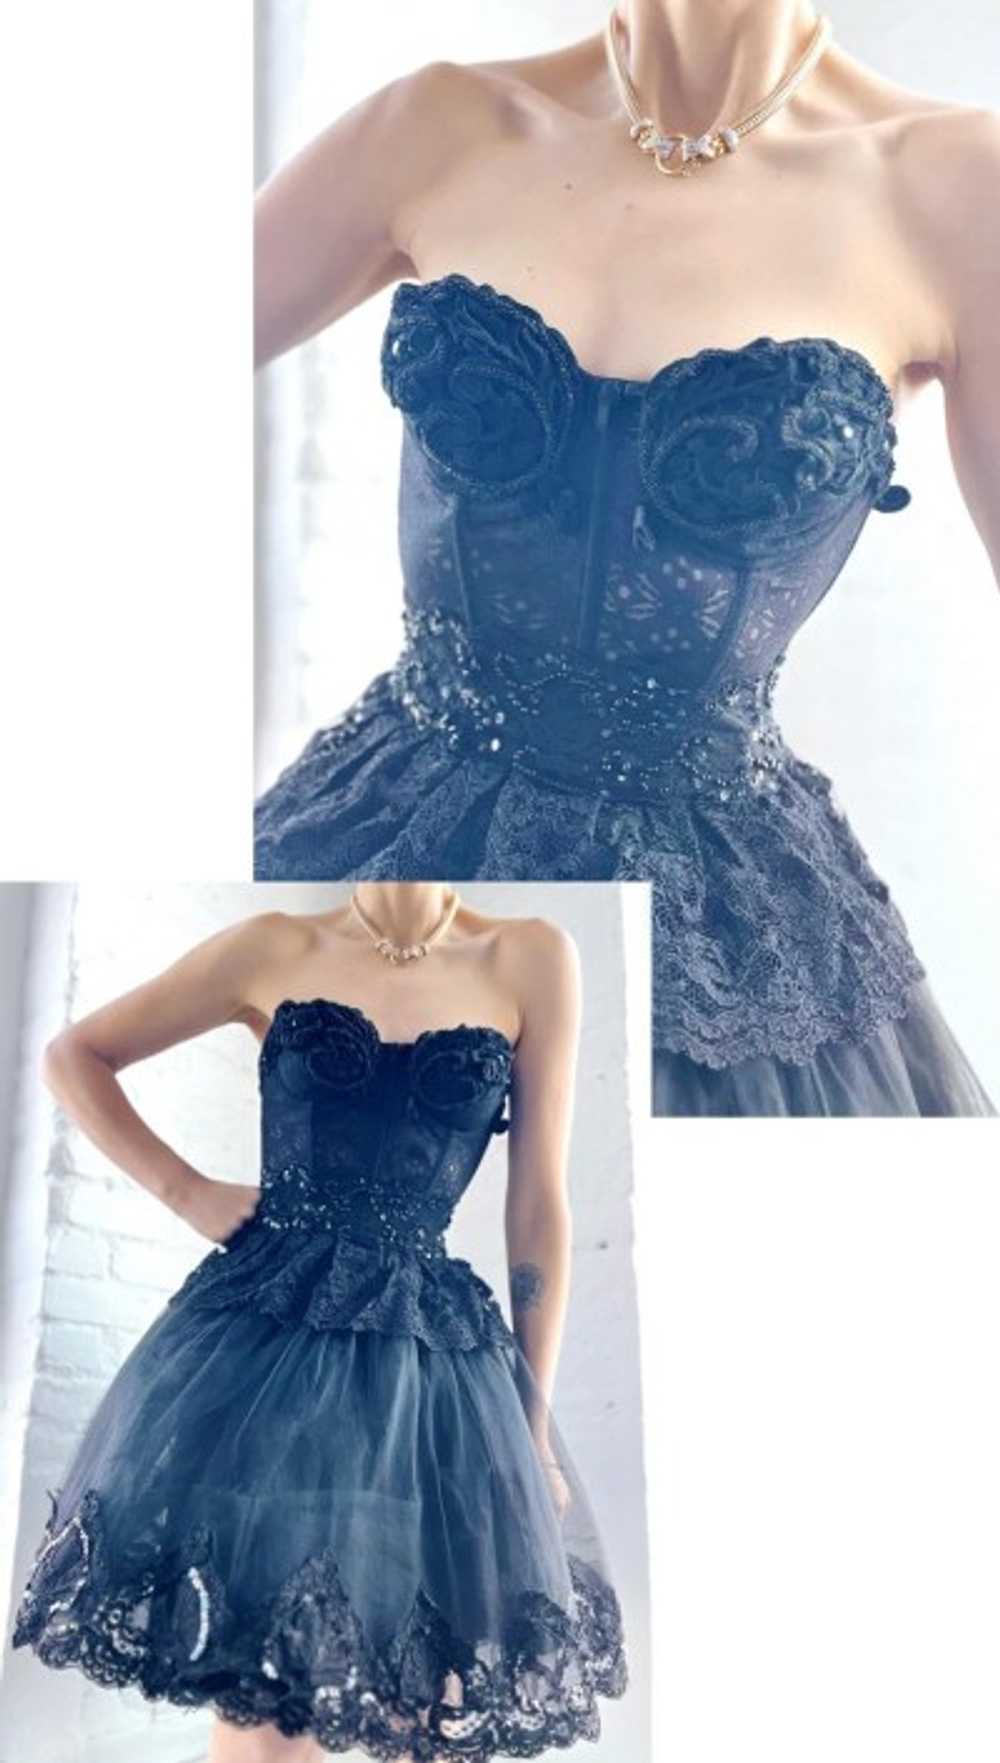 90s bustier tulle lace dress - image 4